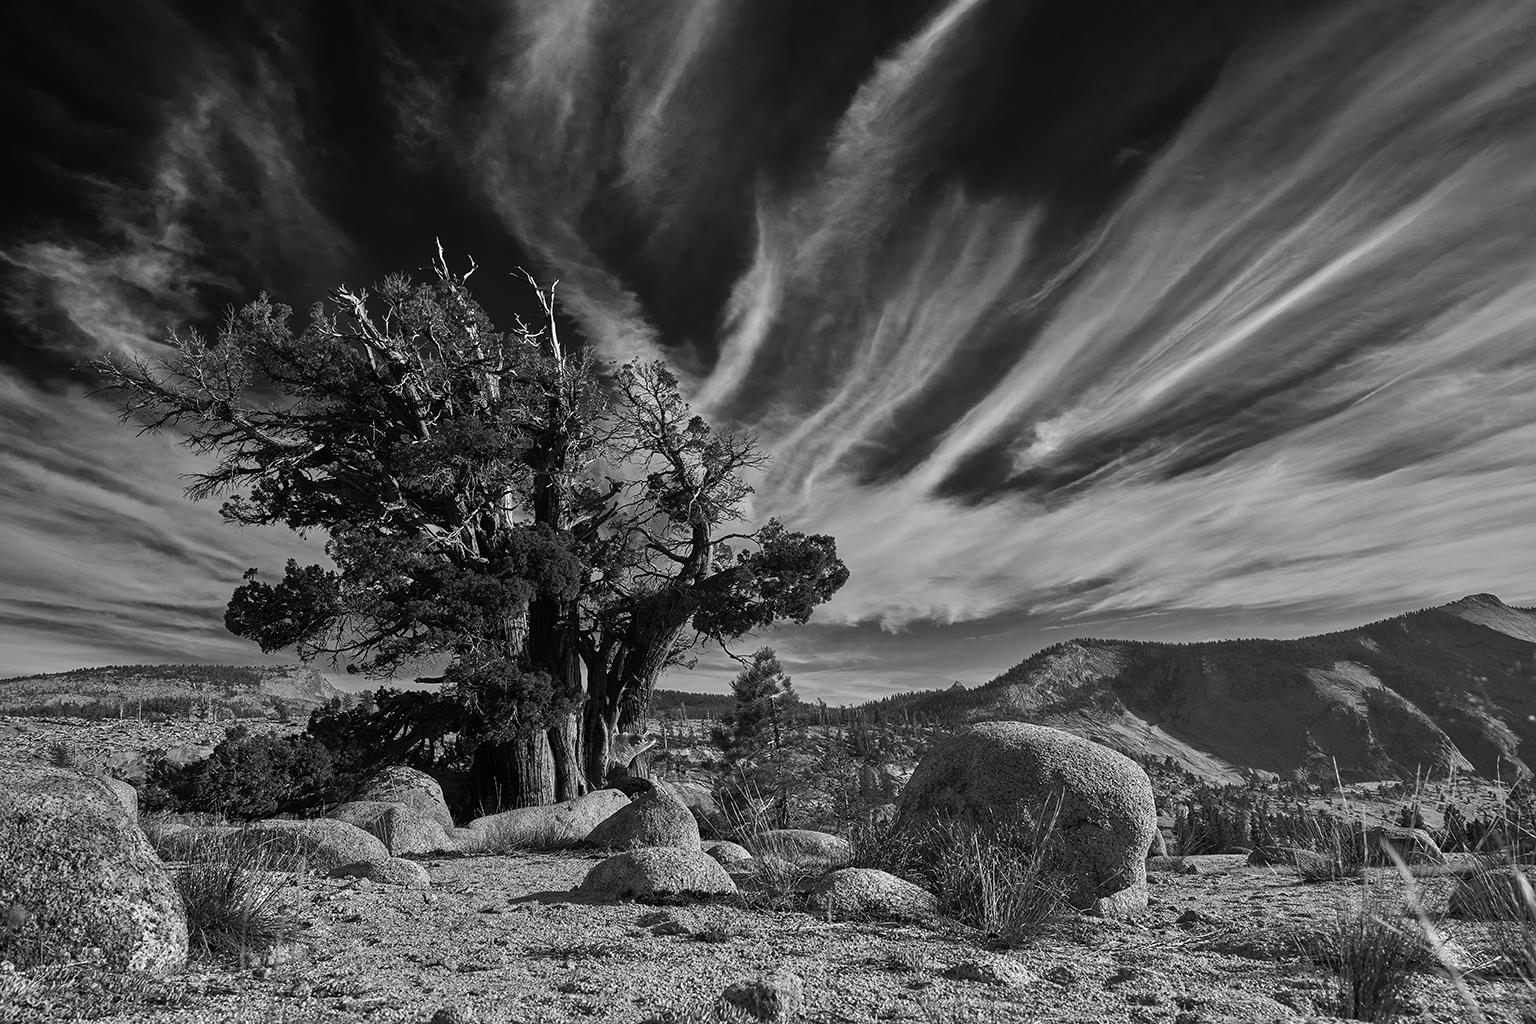 Tree Study III - large scale photograph of dramatic mountain landscape